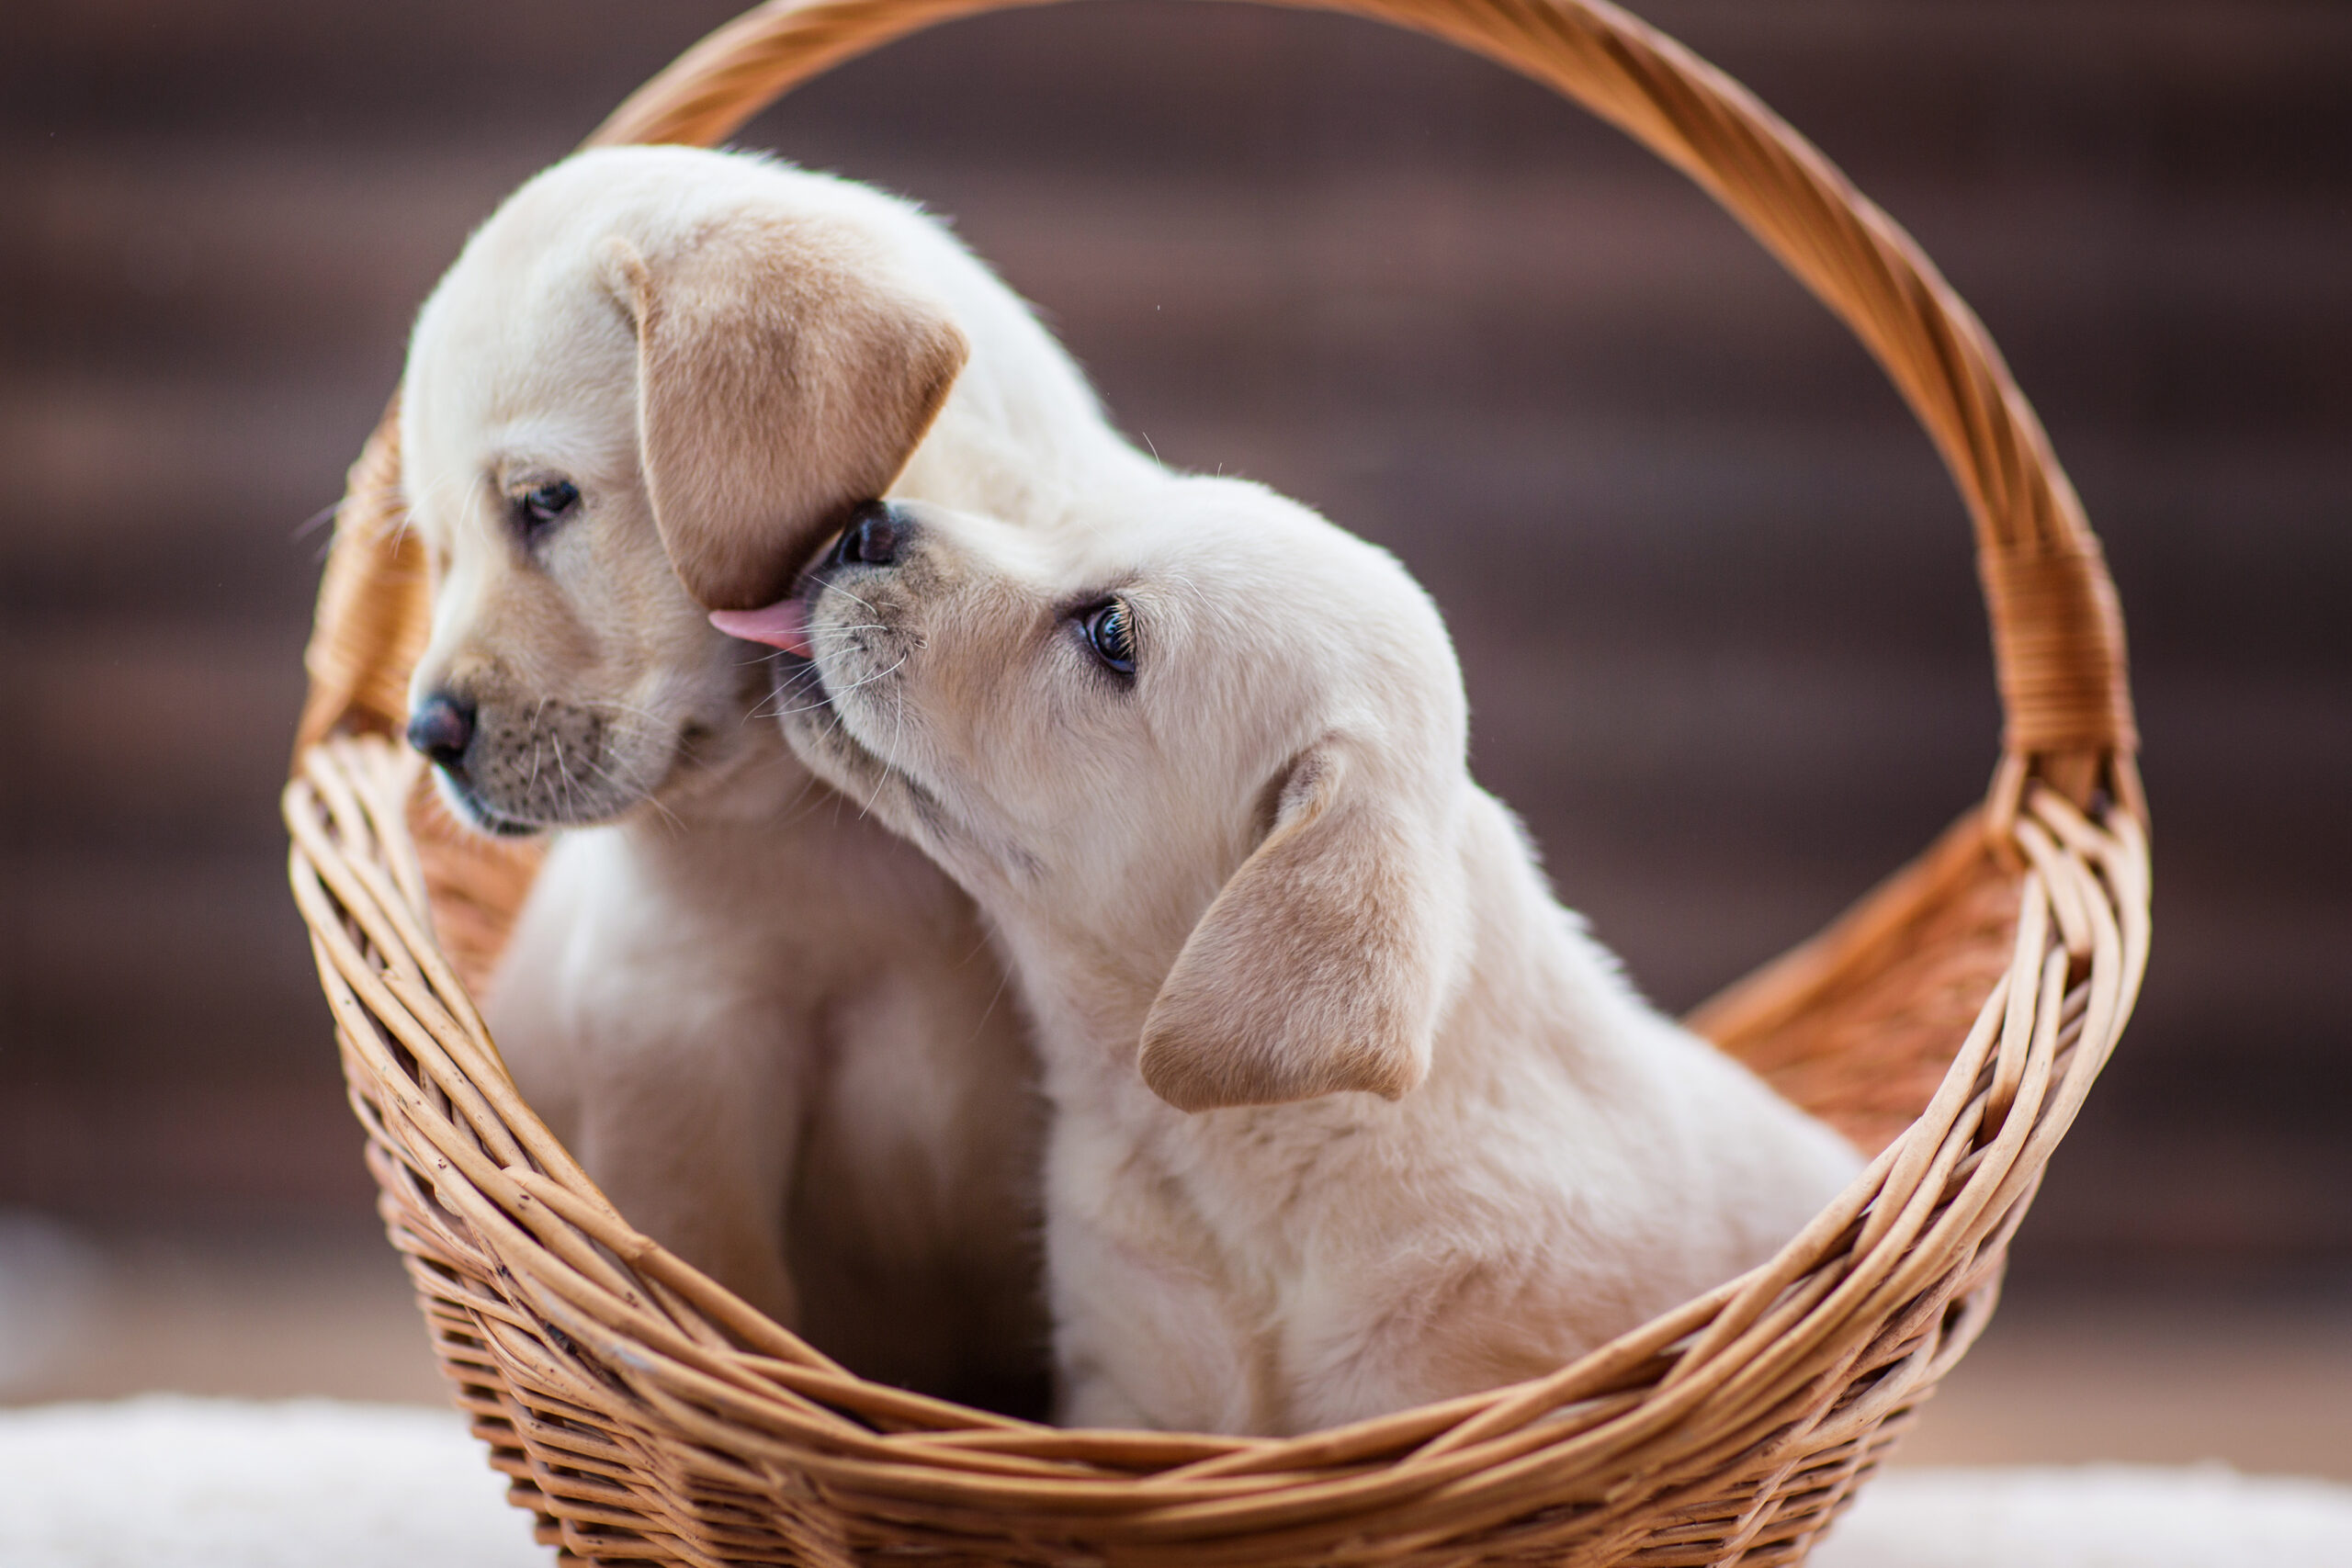 Two Lab puppies in a basket